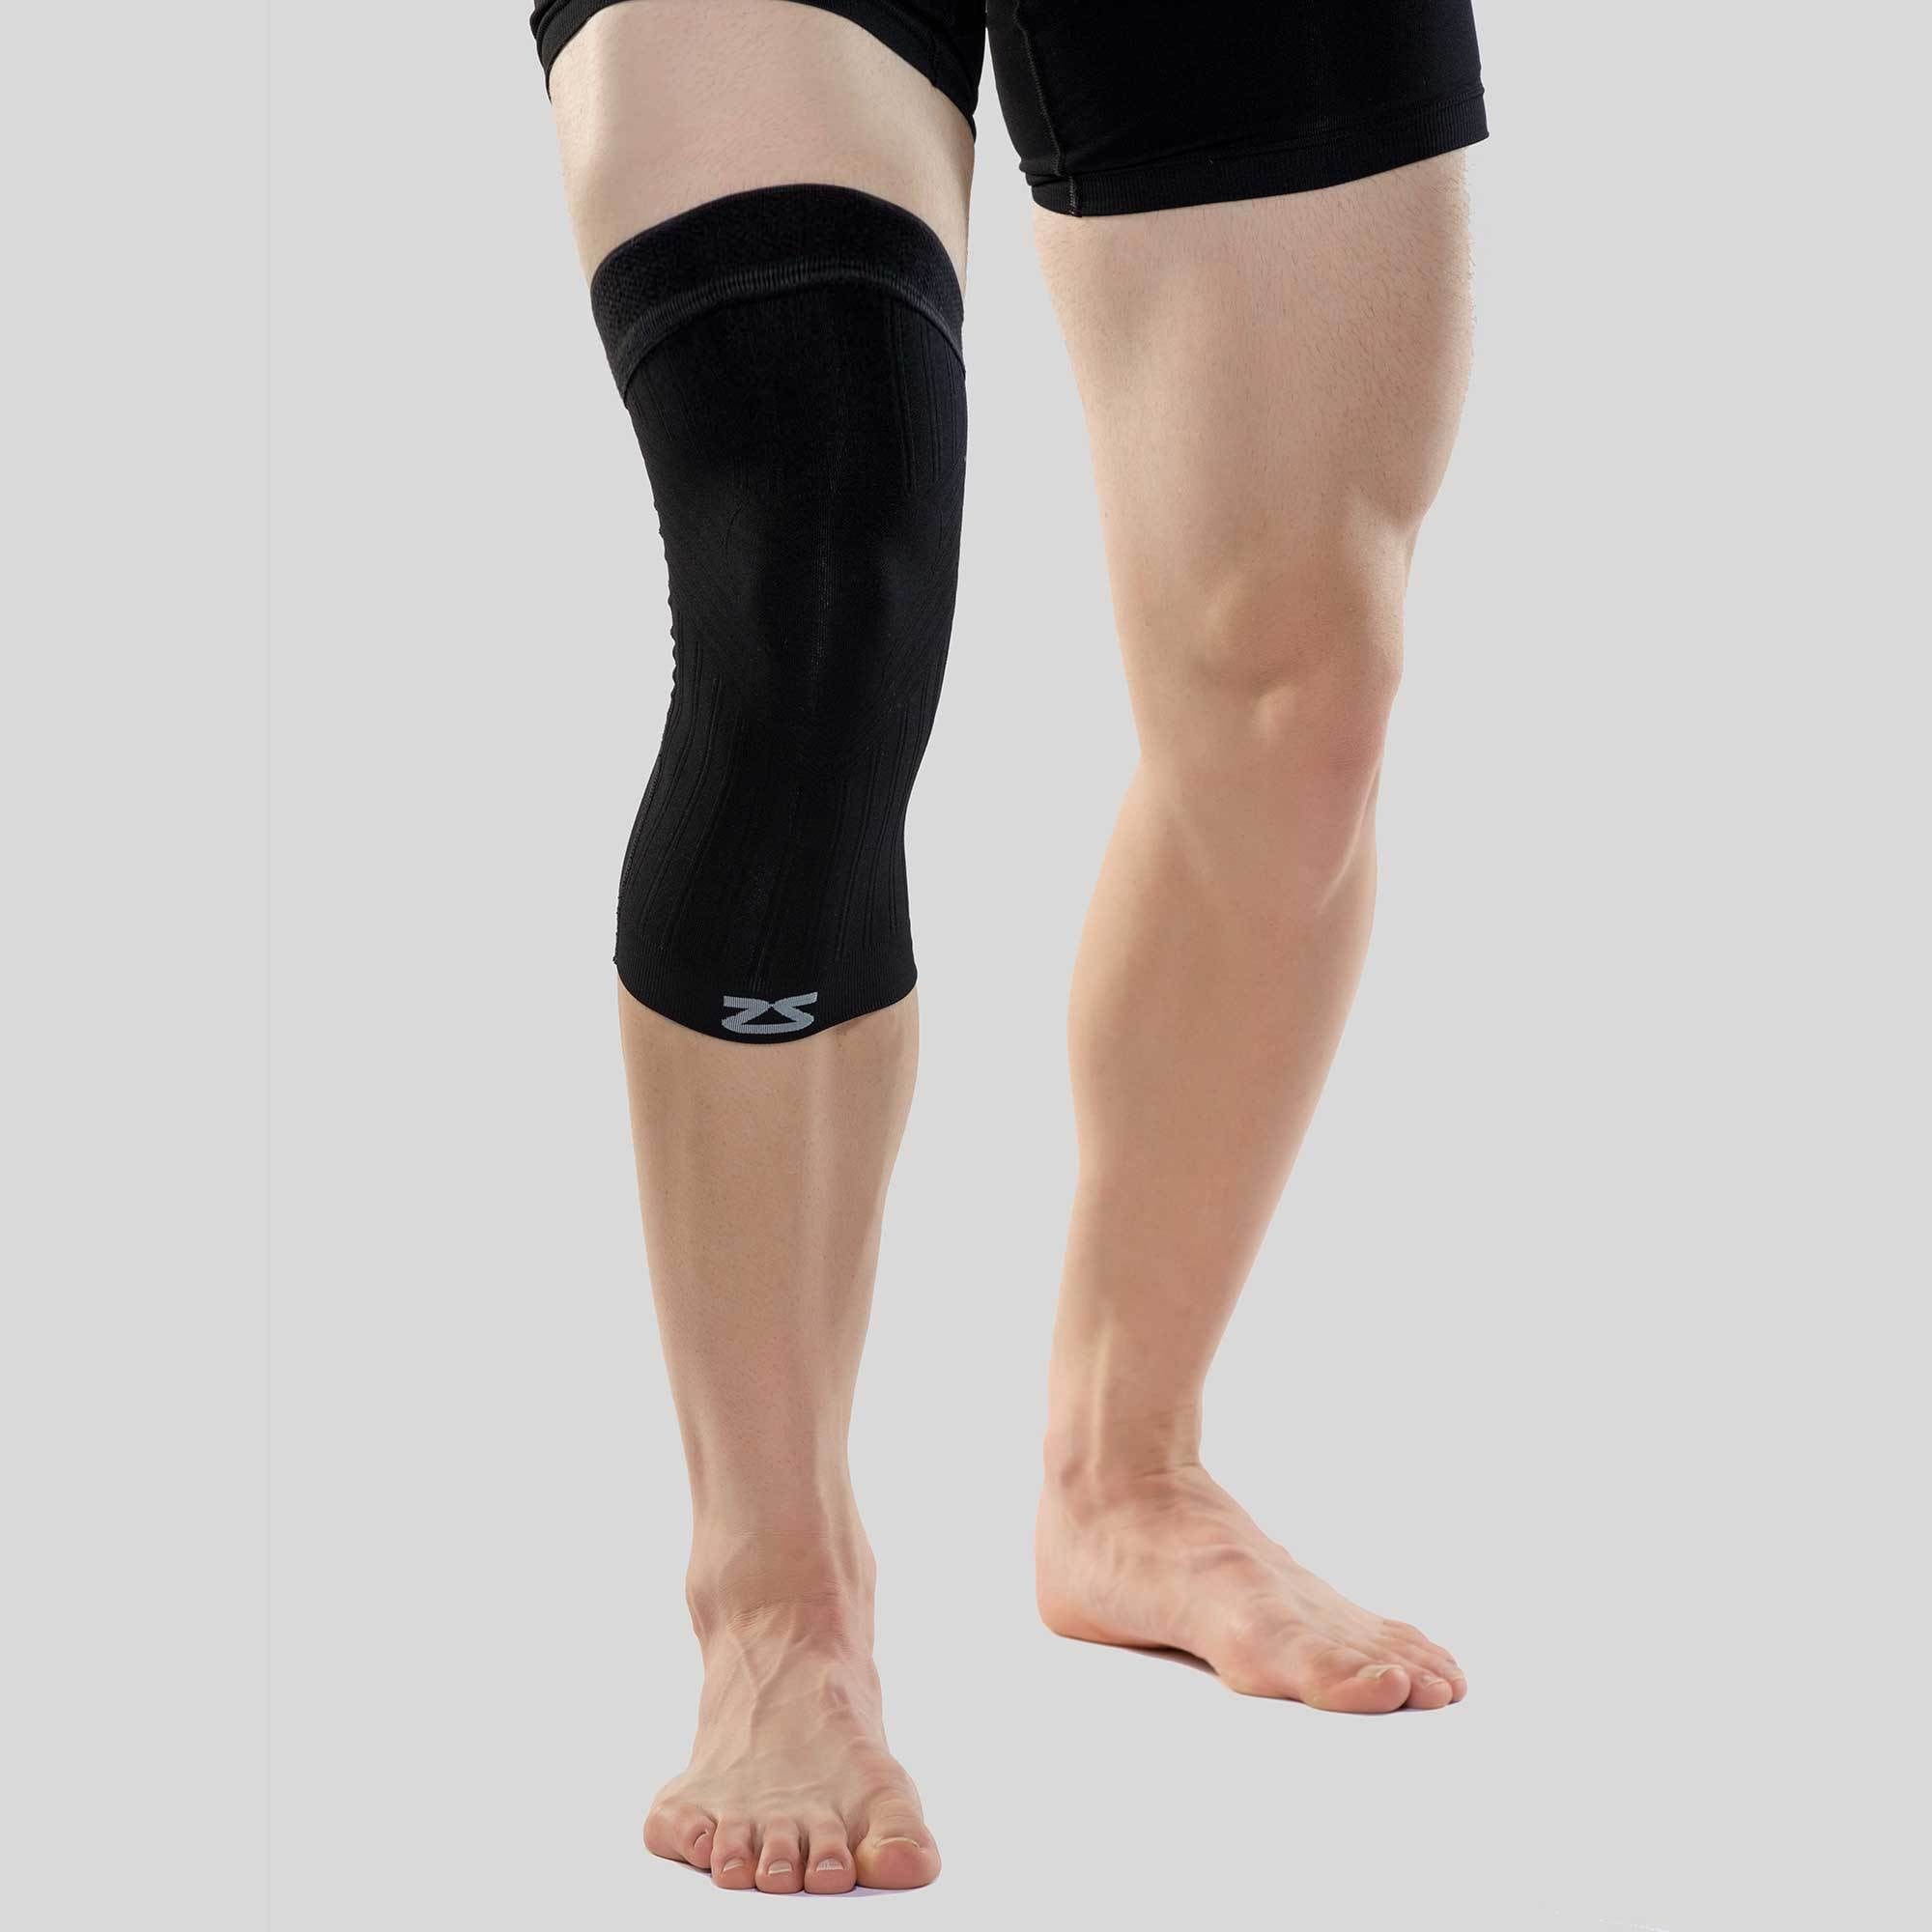 Knee brace knee compression sleeve for protection pain injury recovery –  Vin Zen